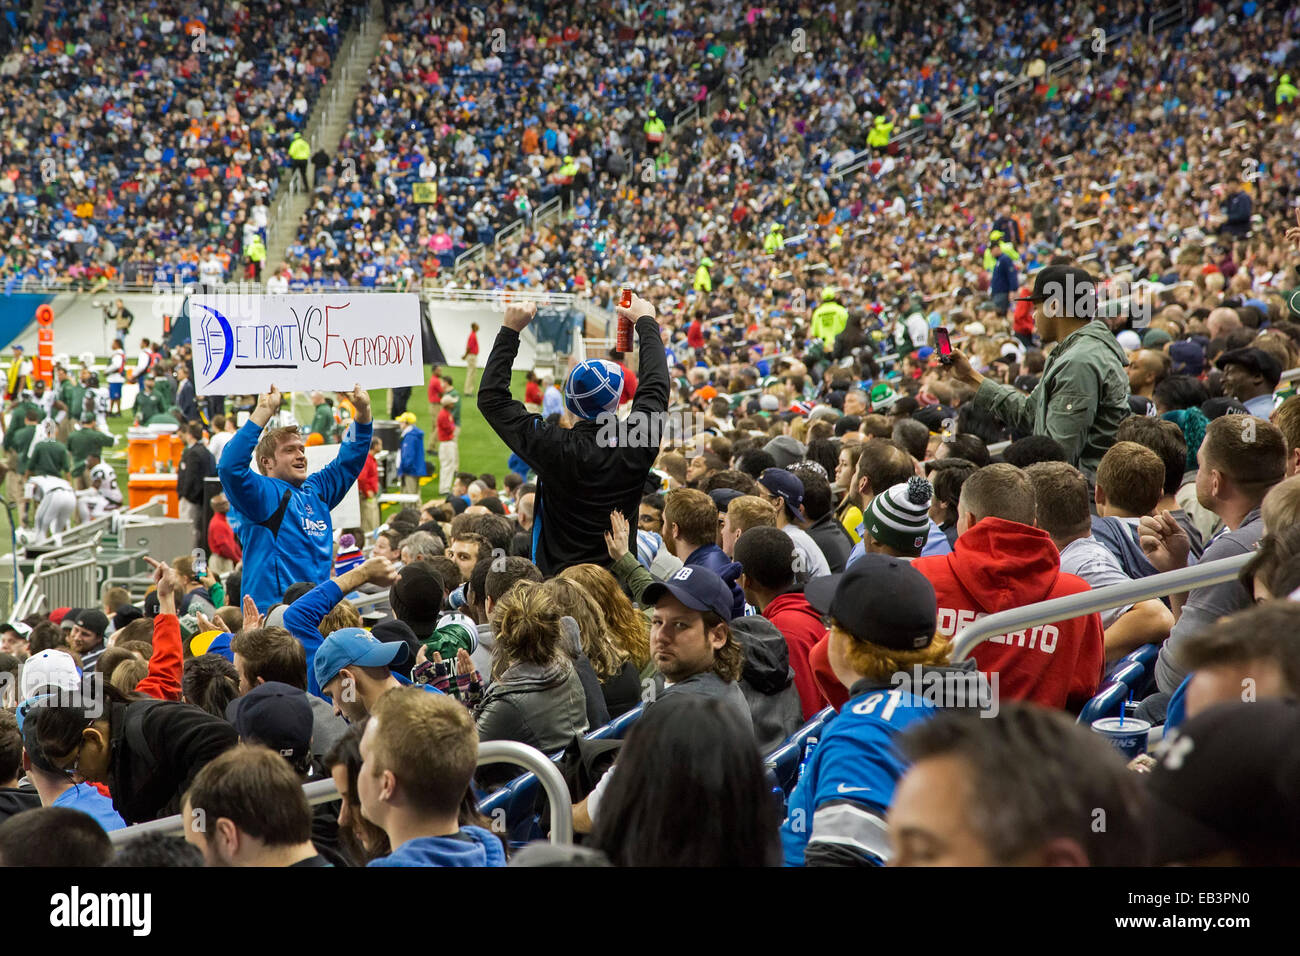 Detroit, Michigan - A man holds a sign reading 'Detroit vs. Everybody' during a National Football League game at Ford Field. Stock Photo